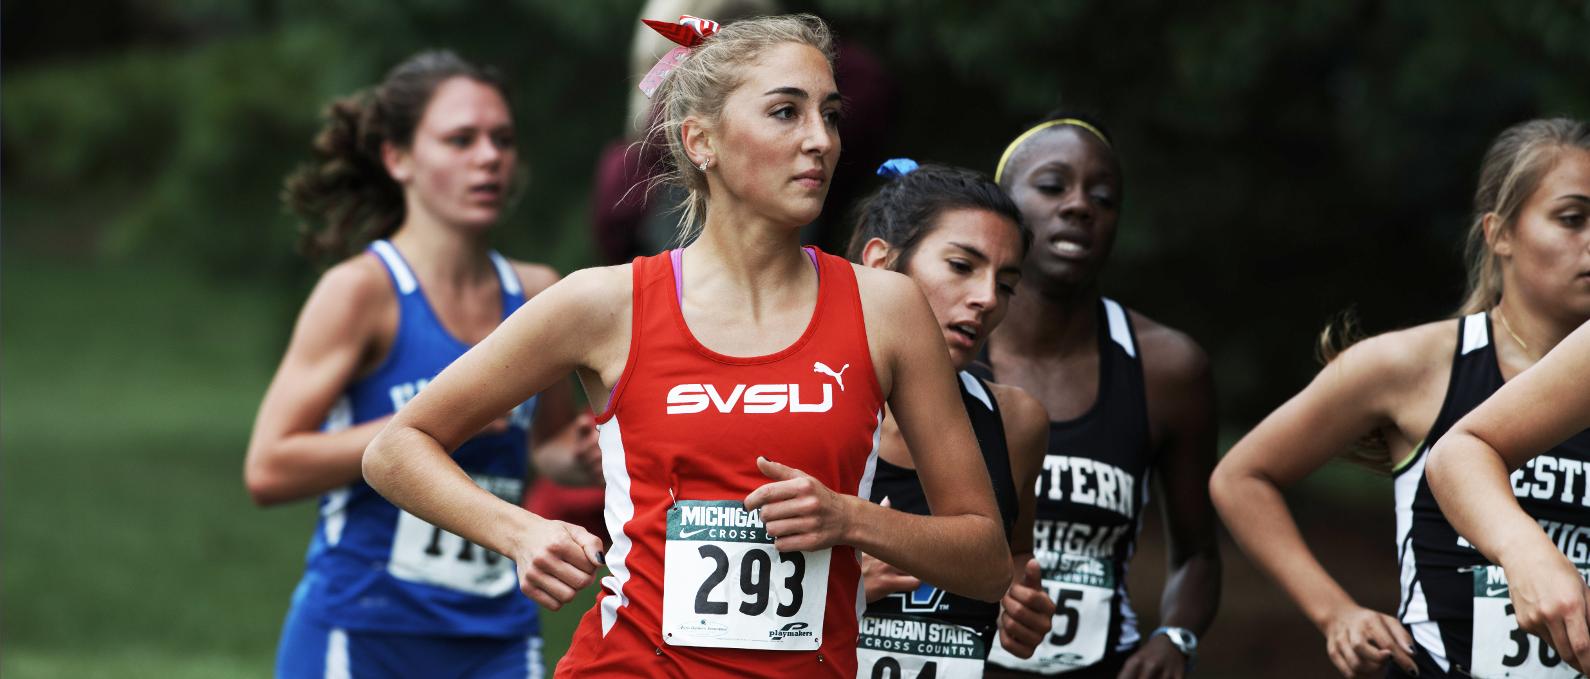 Women's XC Set To Run At Midwest Regionals